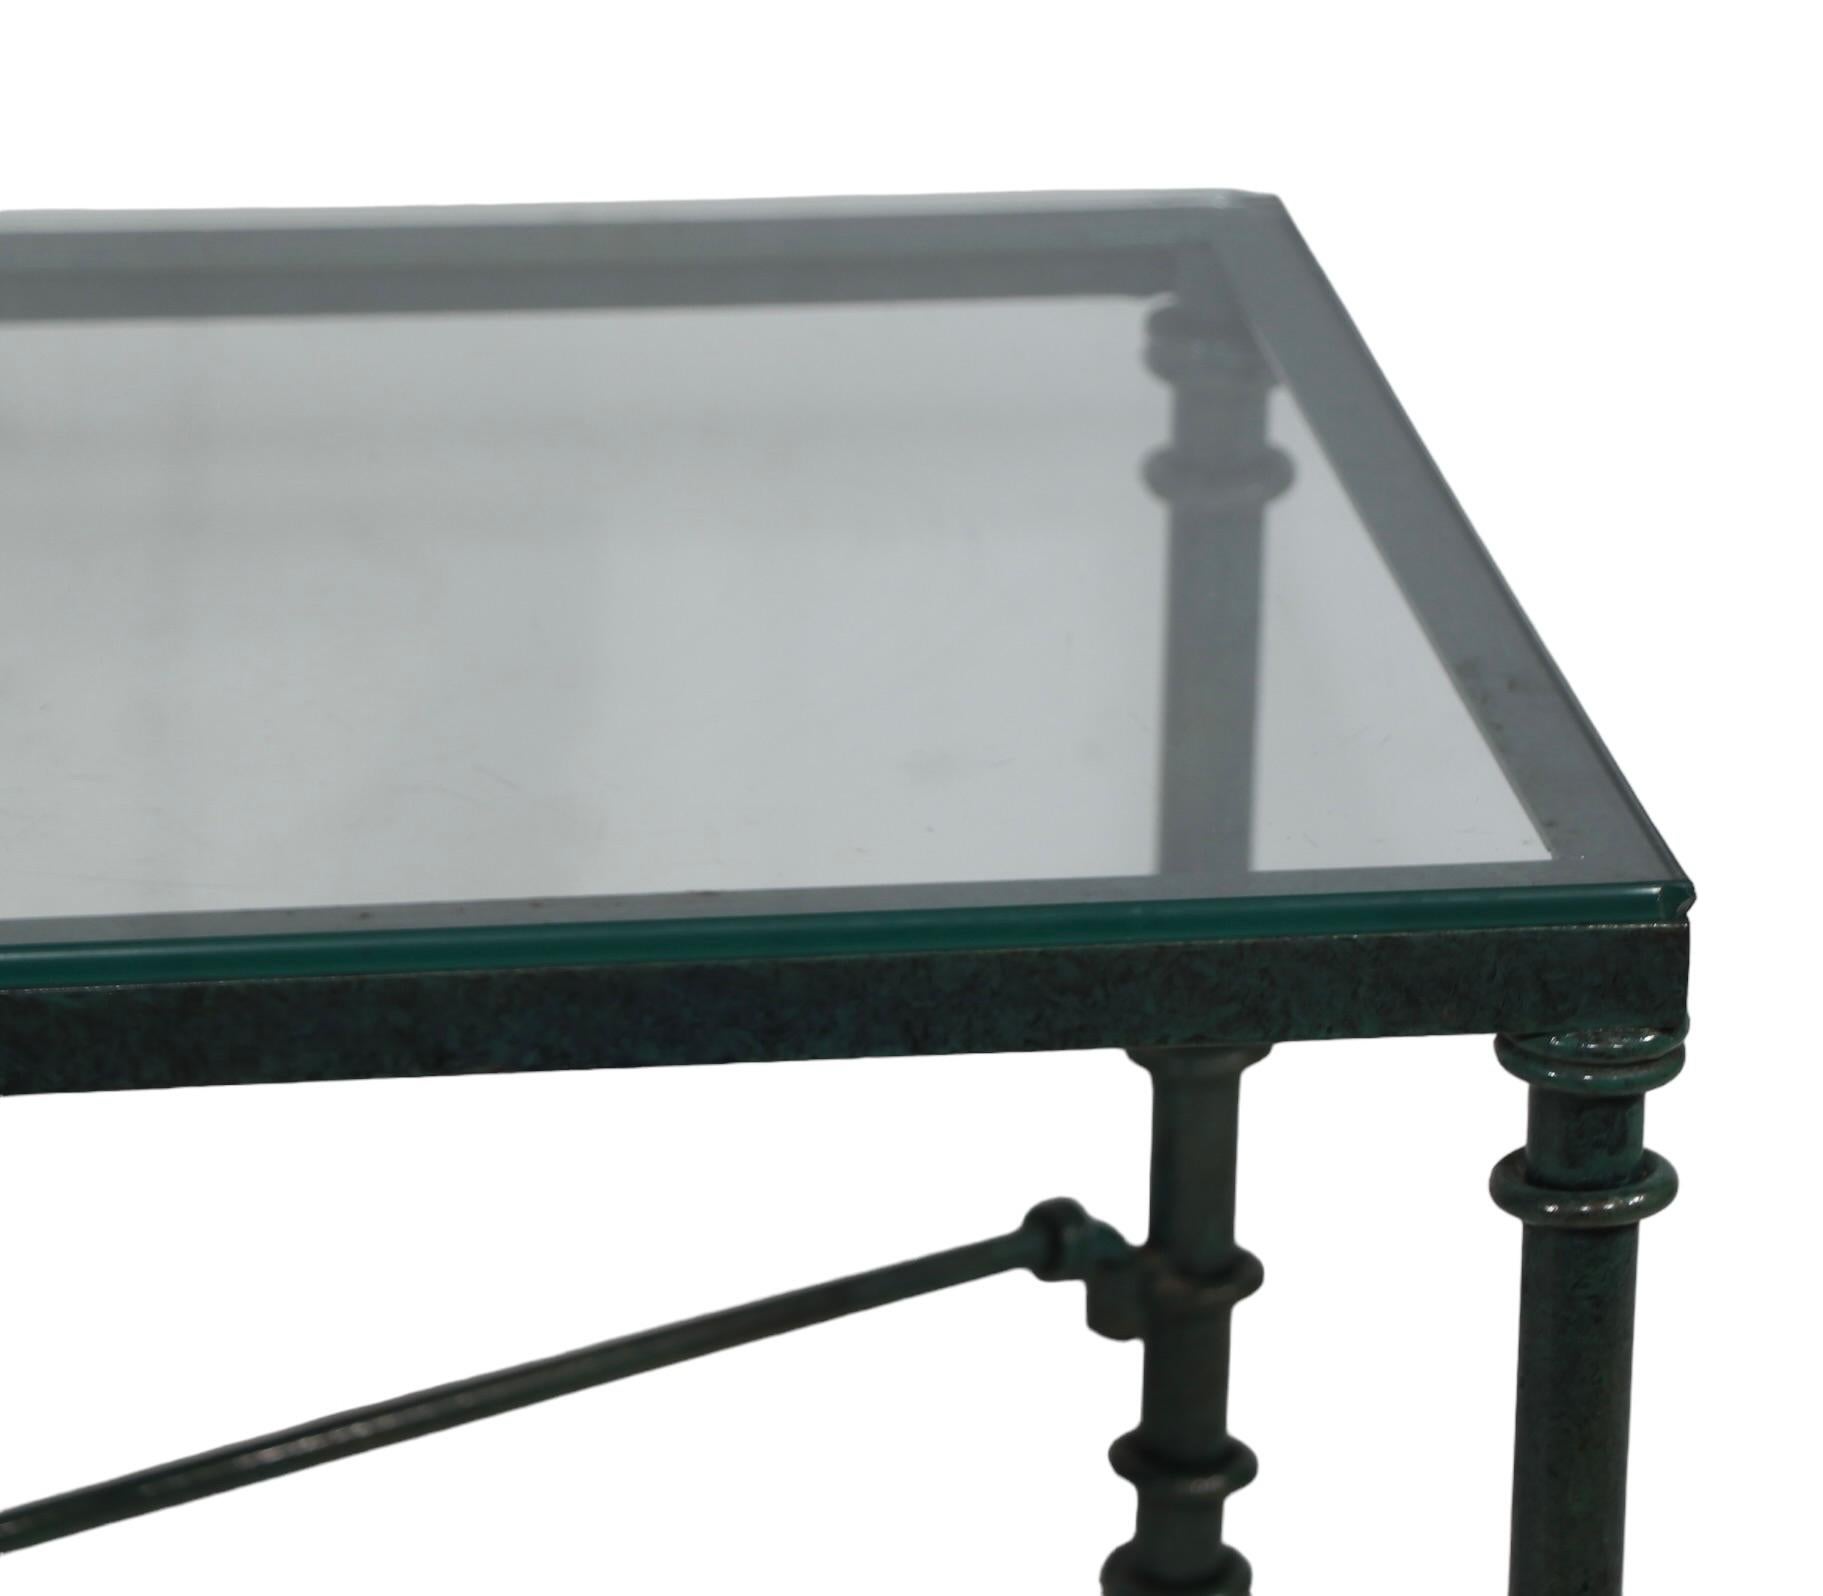 Brutalist Faux Verdigris Finish Glass Top Coffee Table c. 1970/1980's For Sale 2